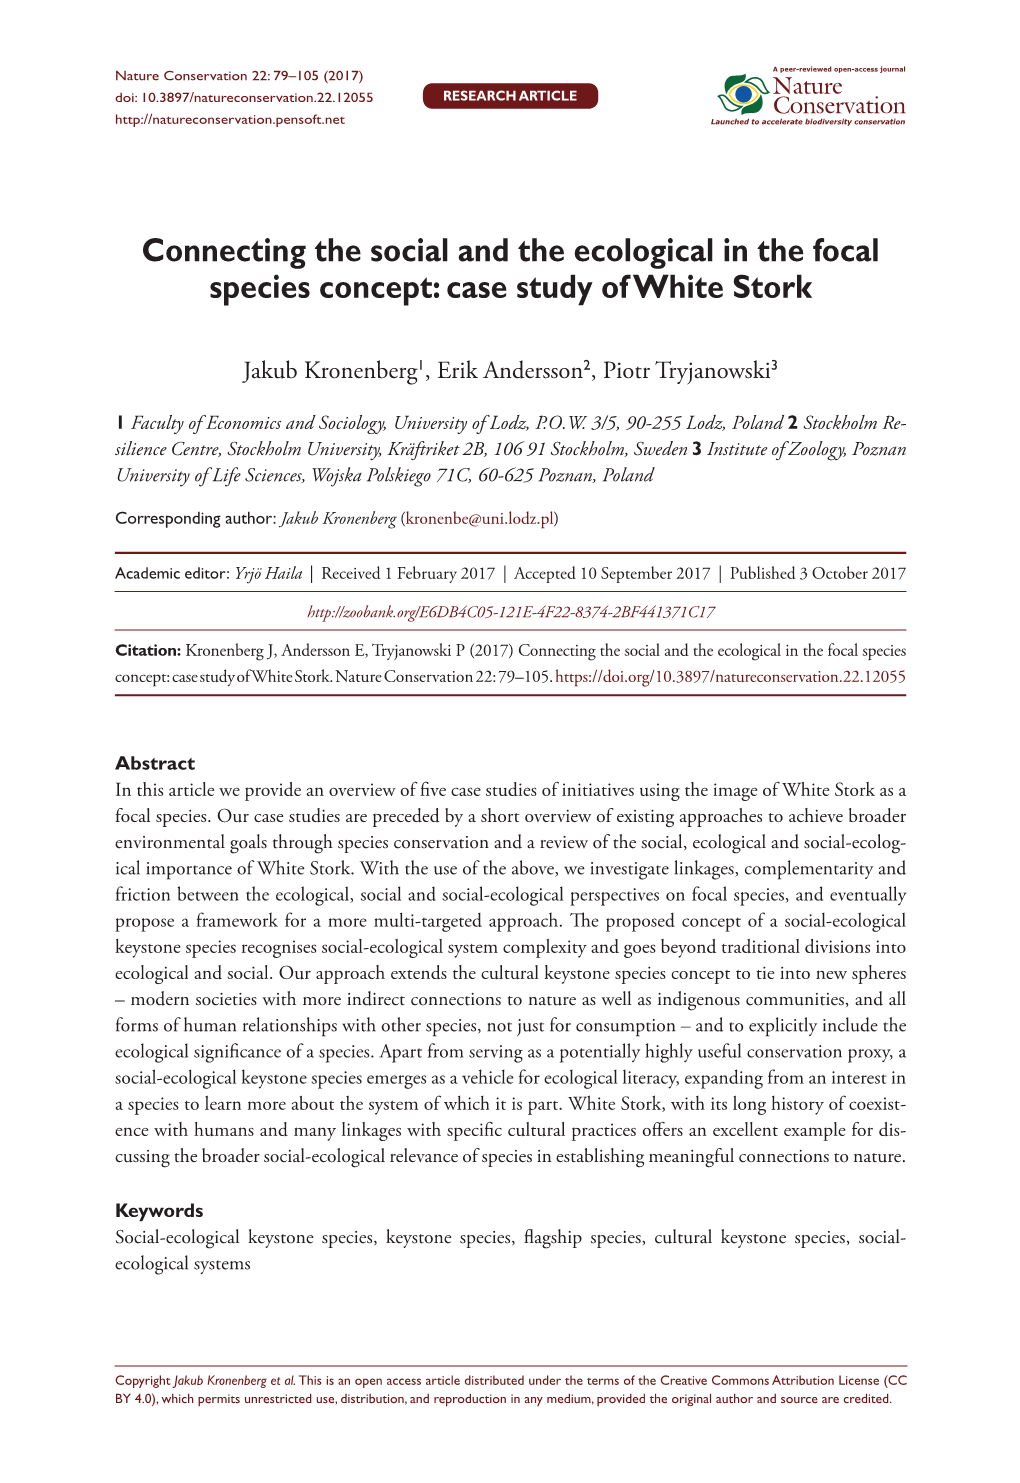 Connecting the Social and the Ecological in the Focal Species Concept: Case Study of White Stork